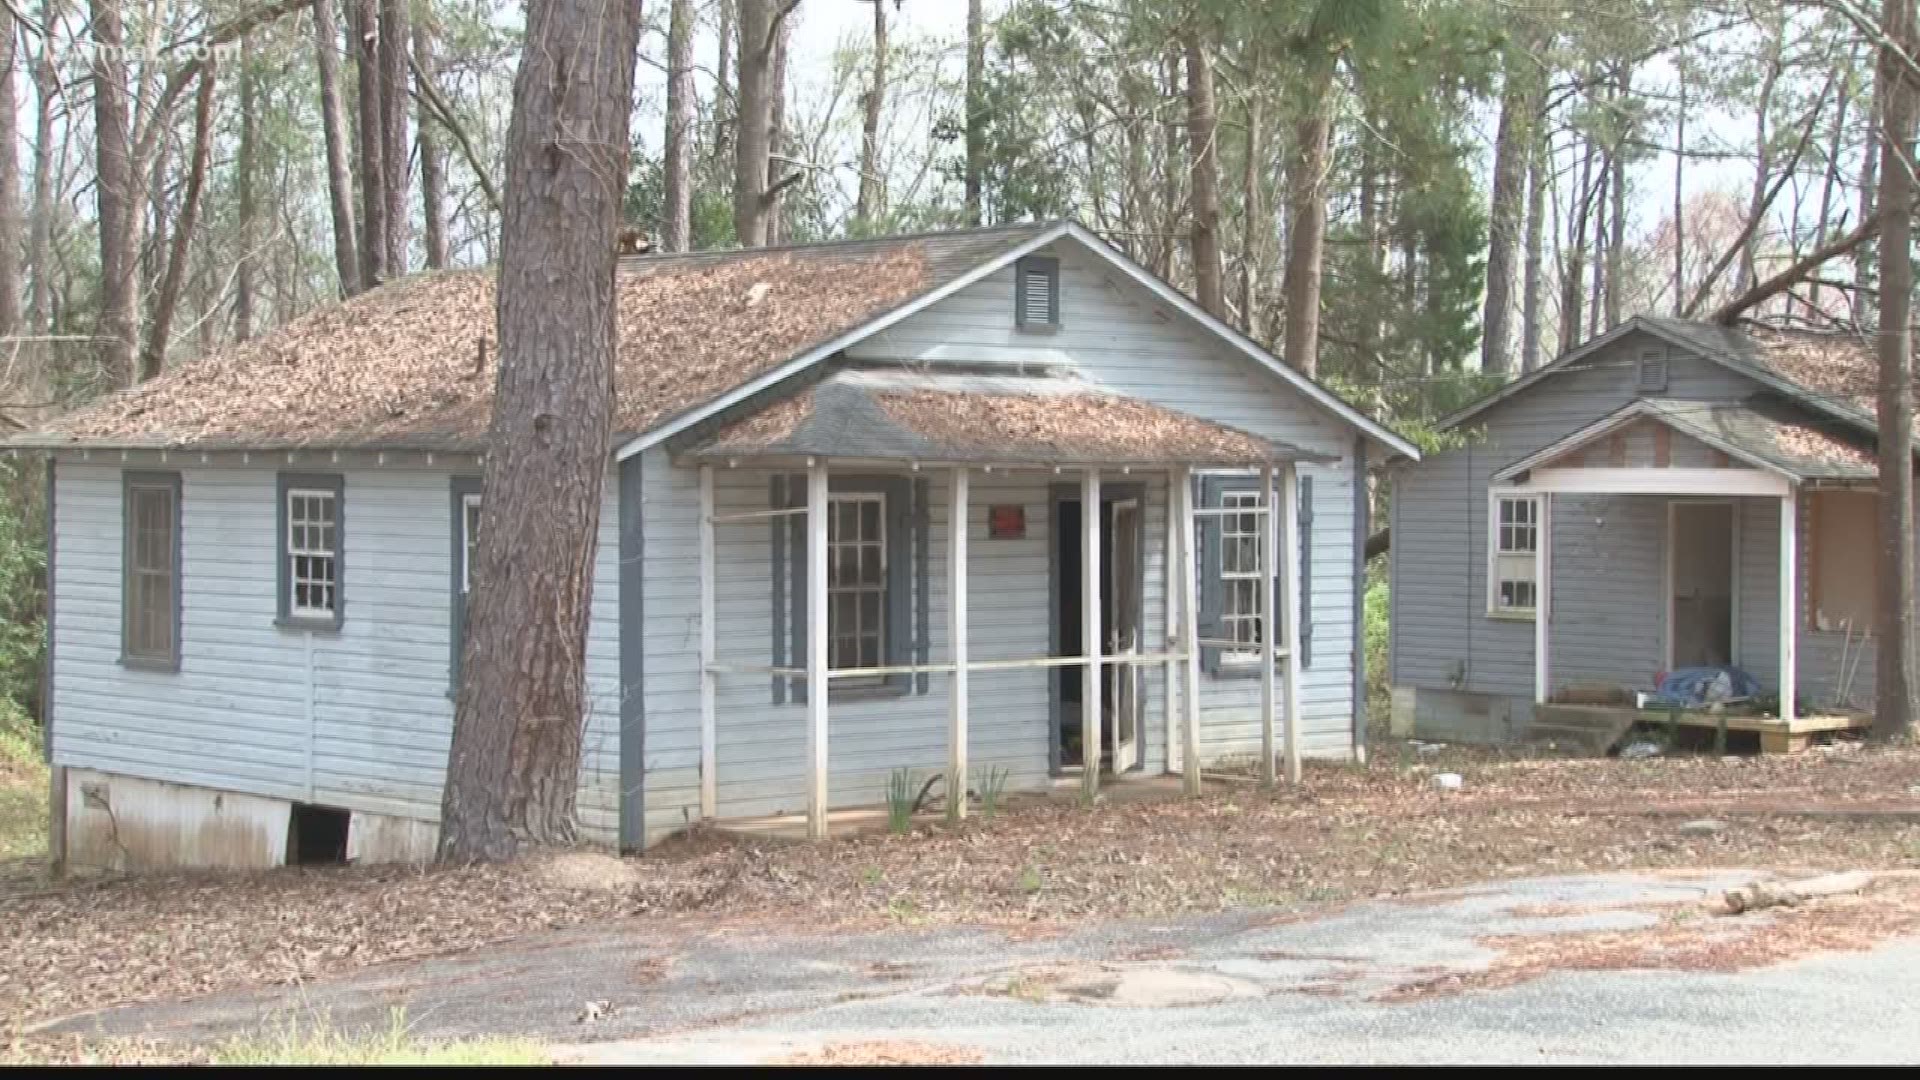 There'll be no new tiny homes in Baldwin County, at least for the next 9 months. The county placed a moratorium on tiny homes and other buildings, including manufactured homes in some cases.